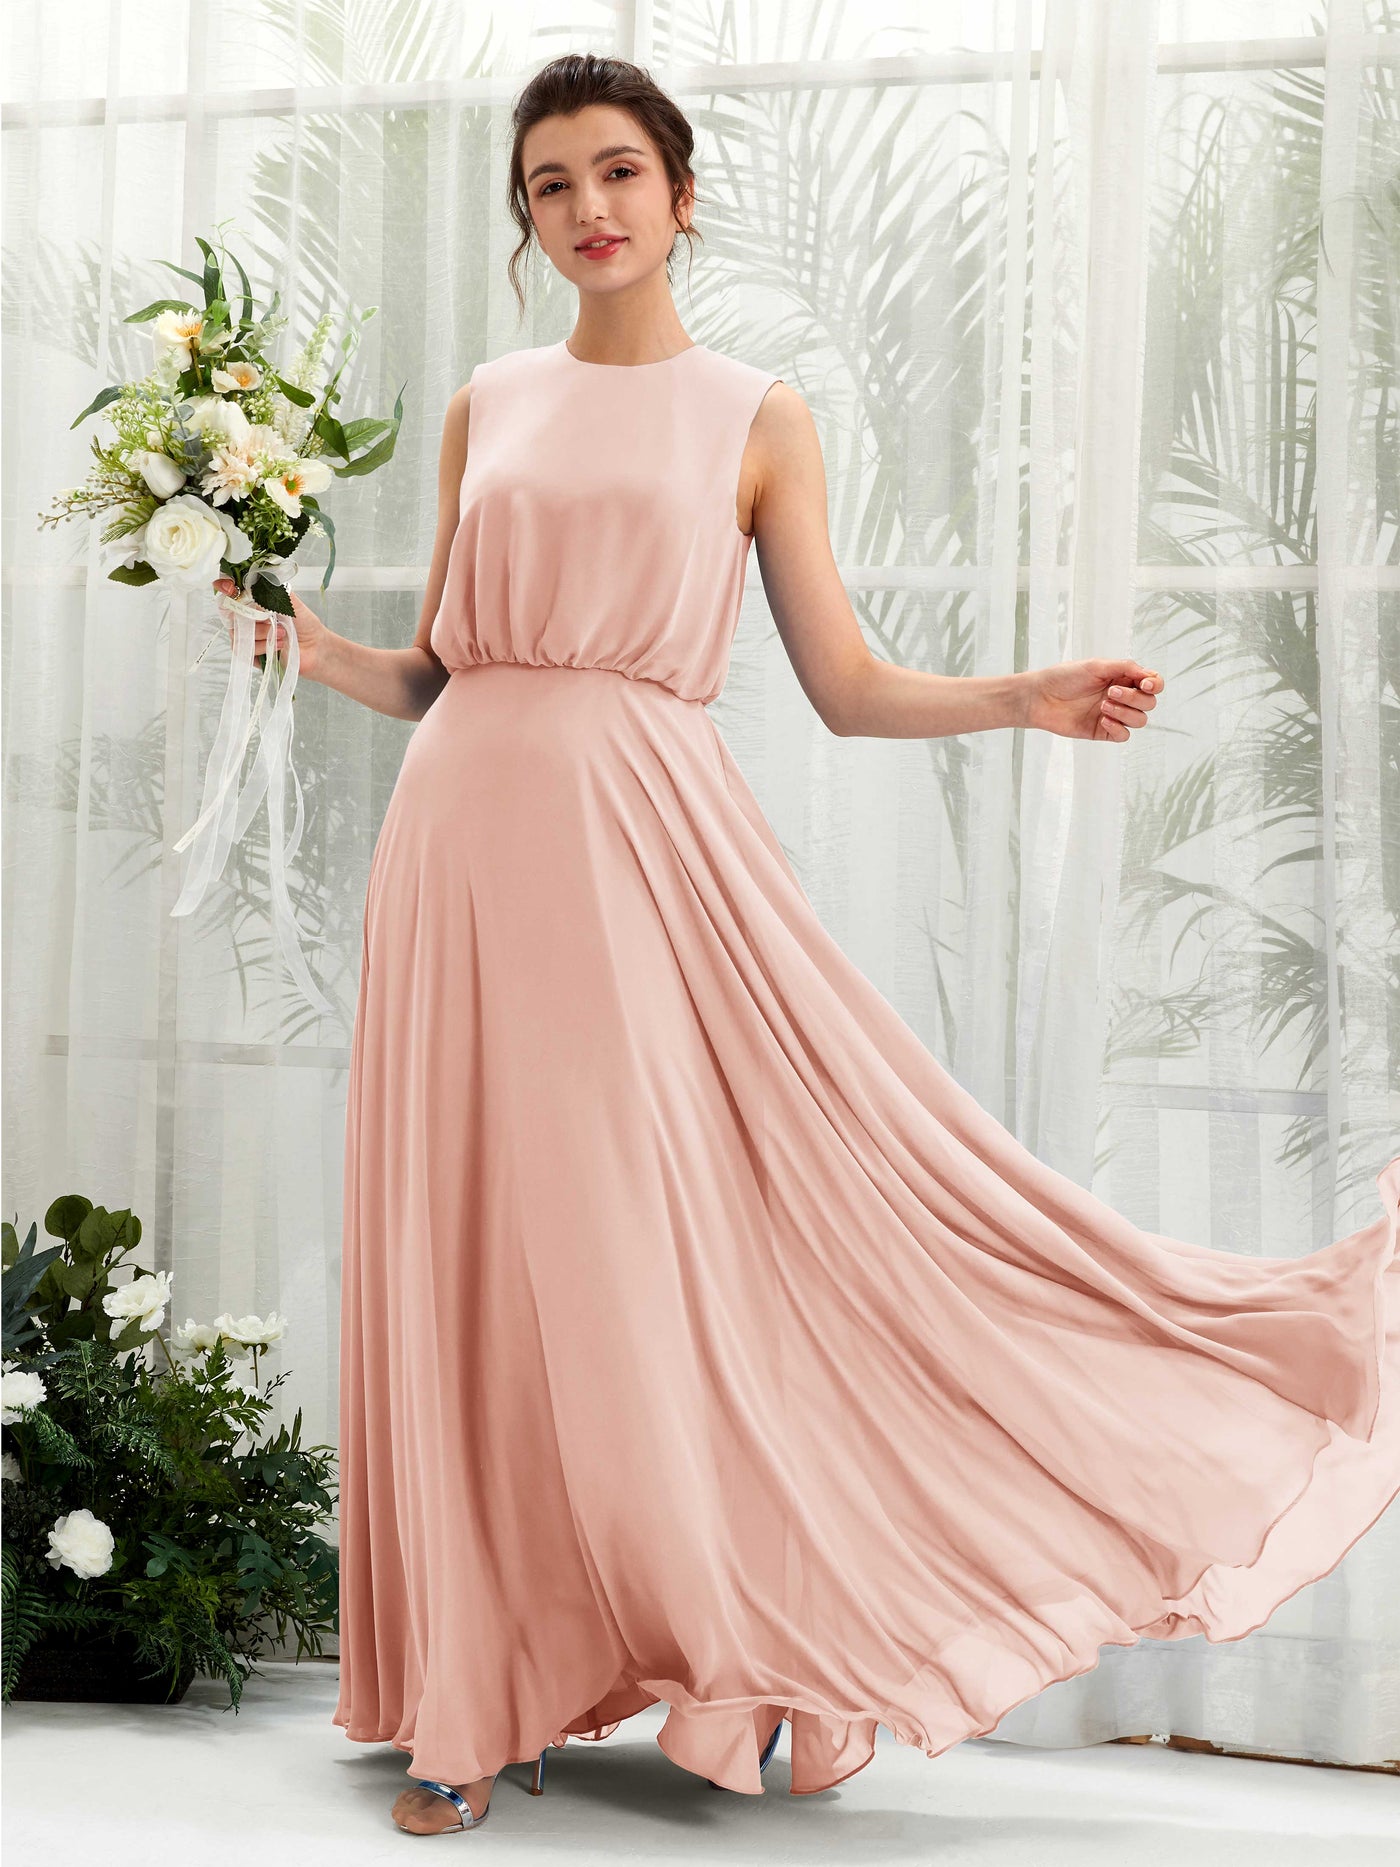 Pearl Pink Bridesmaid Dresses Bridesmaid Dress A-line Chiffon Round Full Length Sleeveless Wedding Party Dress (81222808)#color_pearl-pink